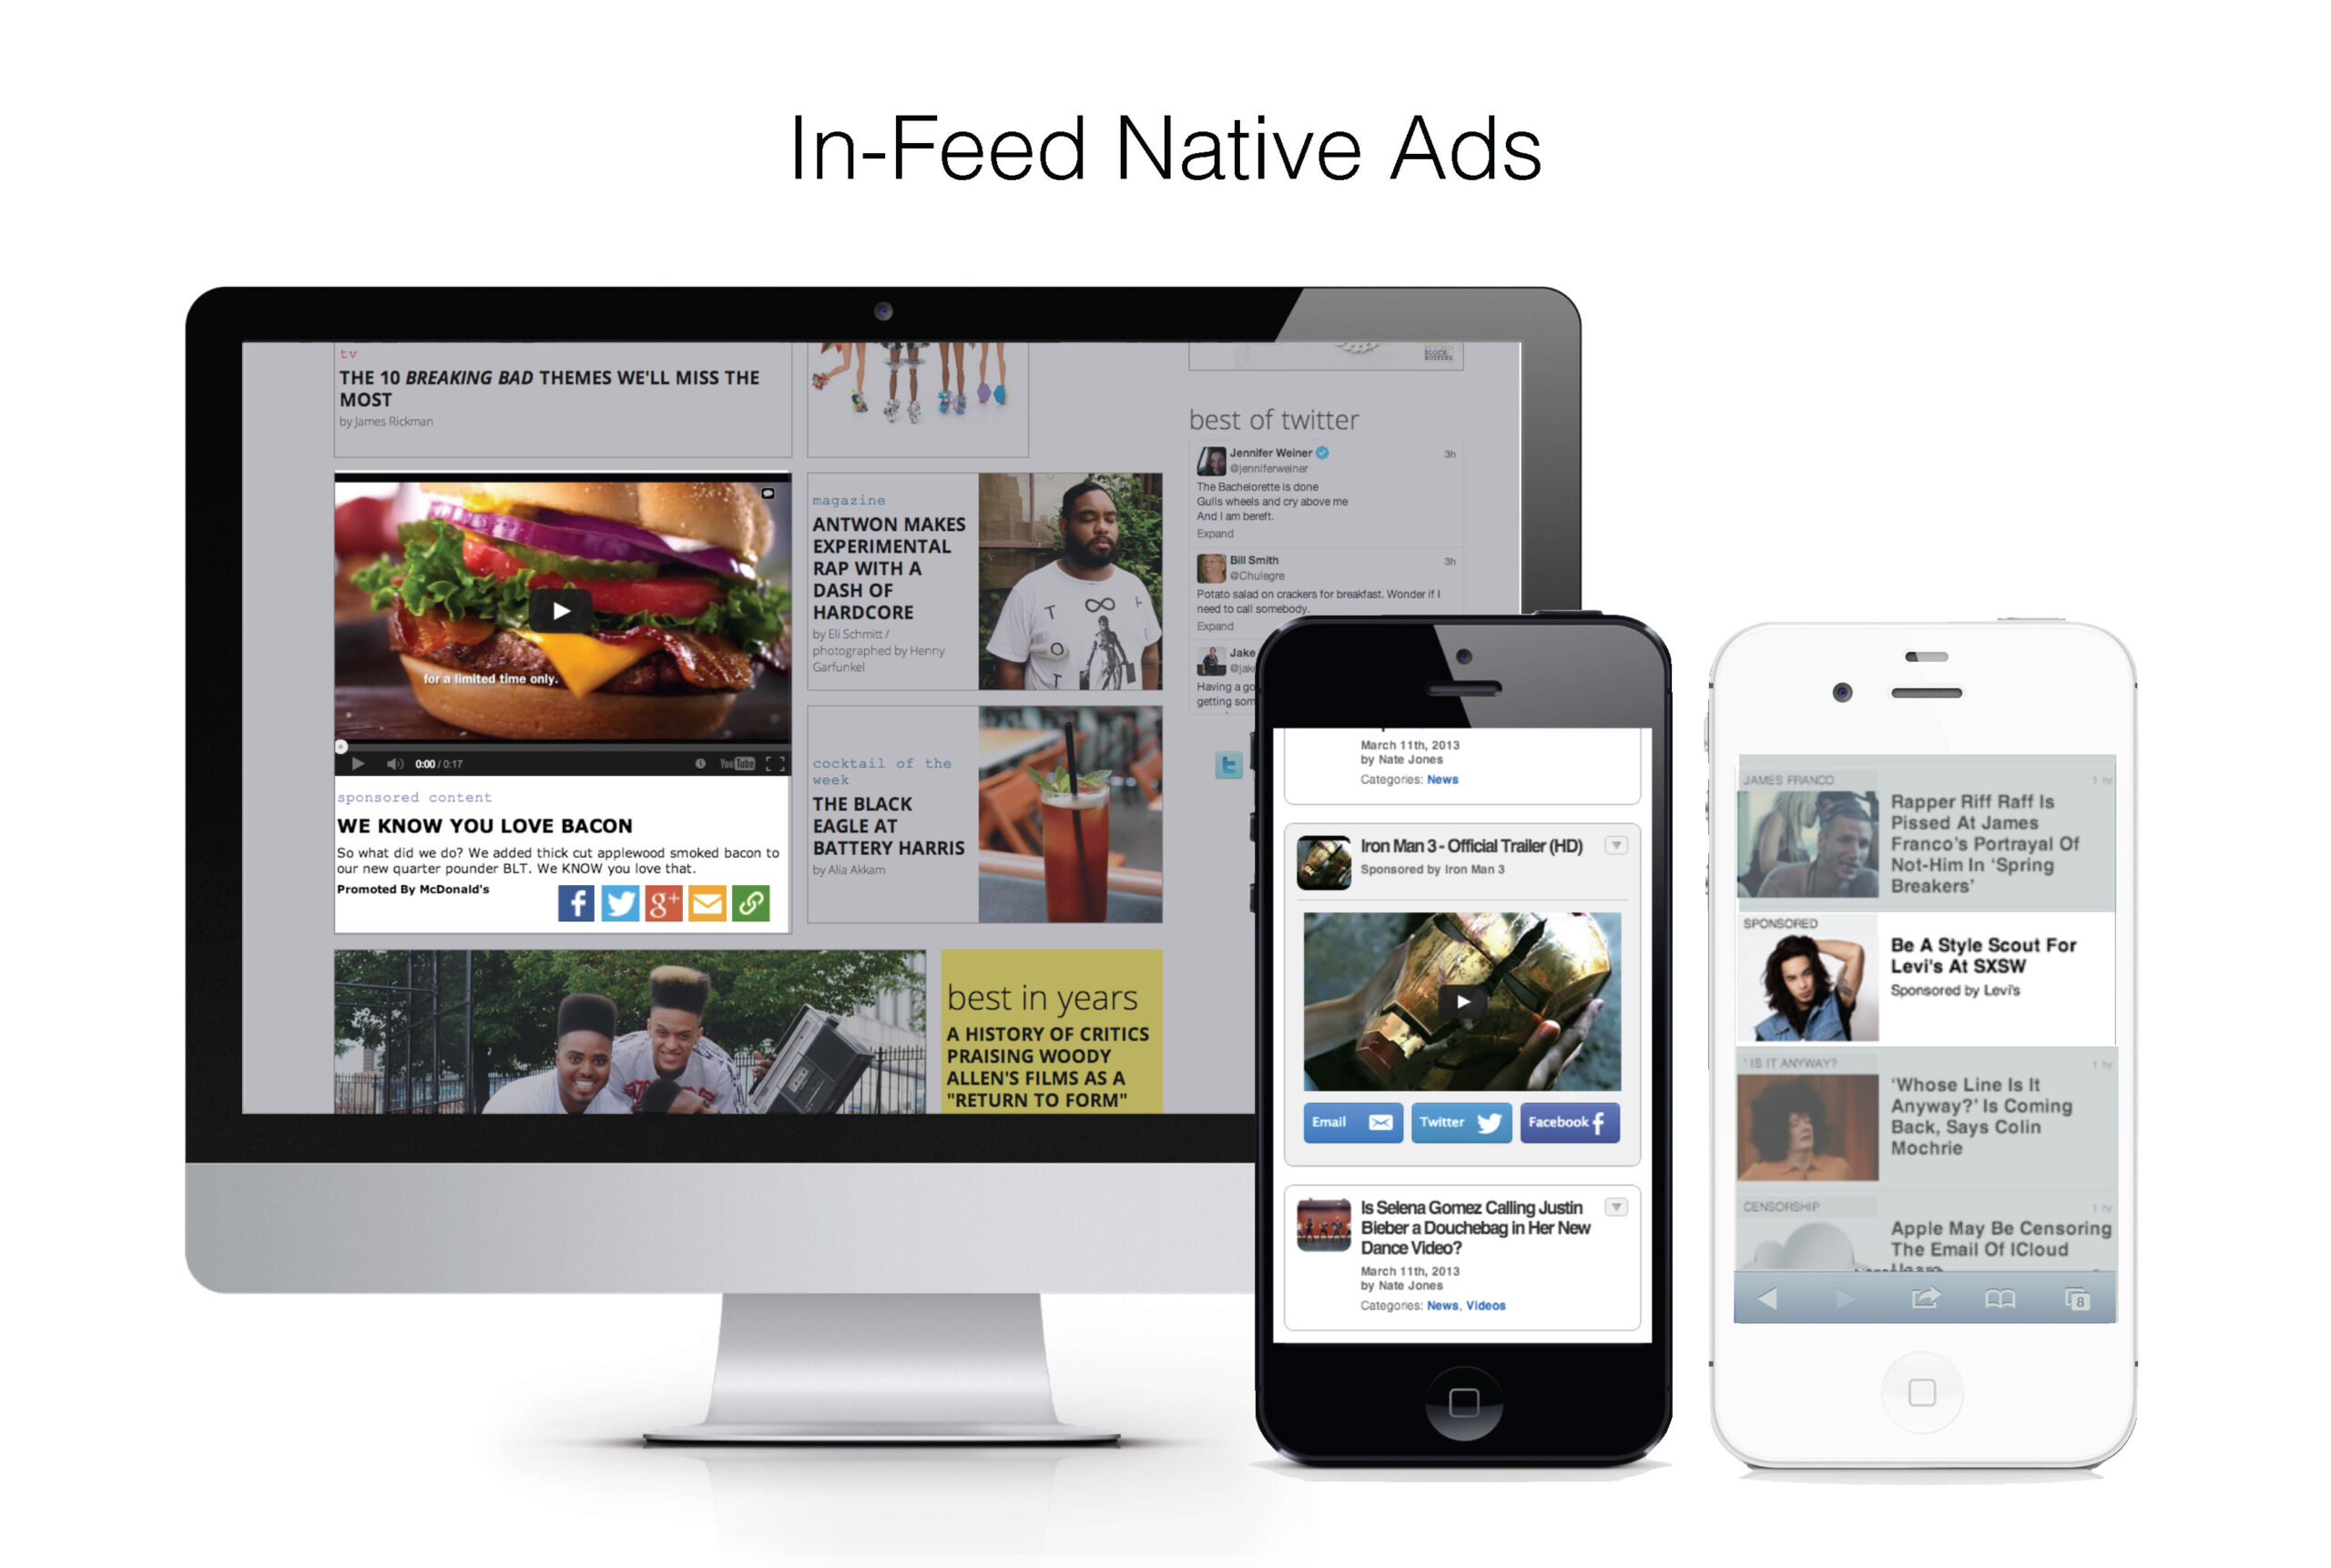 Read more about the article What is Native Ads<span class="rmp-archive-results-widget "><i class=" rmp-icon rmp-icon--ratings rmp-icon--star rmp-icon--full-highlight"></i><i class=" rmp-icon rmp-icon--ratings rmp-icon--star rmp-icon--full-highlight"></i><i class=" rmp-icon rmp-icon--ratings rmp-icon--star rmp-icon--full-highlight"></i><i class=" rmp-icon rmp-icon--ratings rmp-icon--star rmp-icon--full-highlight"></i><i class=" rmp-icon rmp-icon--ratings rmp-icon--star rmp-icon--full-highlight"></i> <span>5 (1)</span></span>